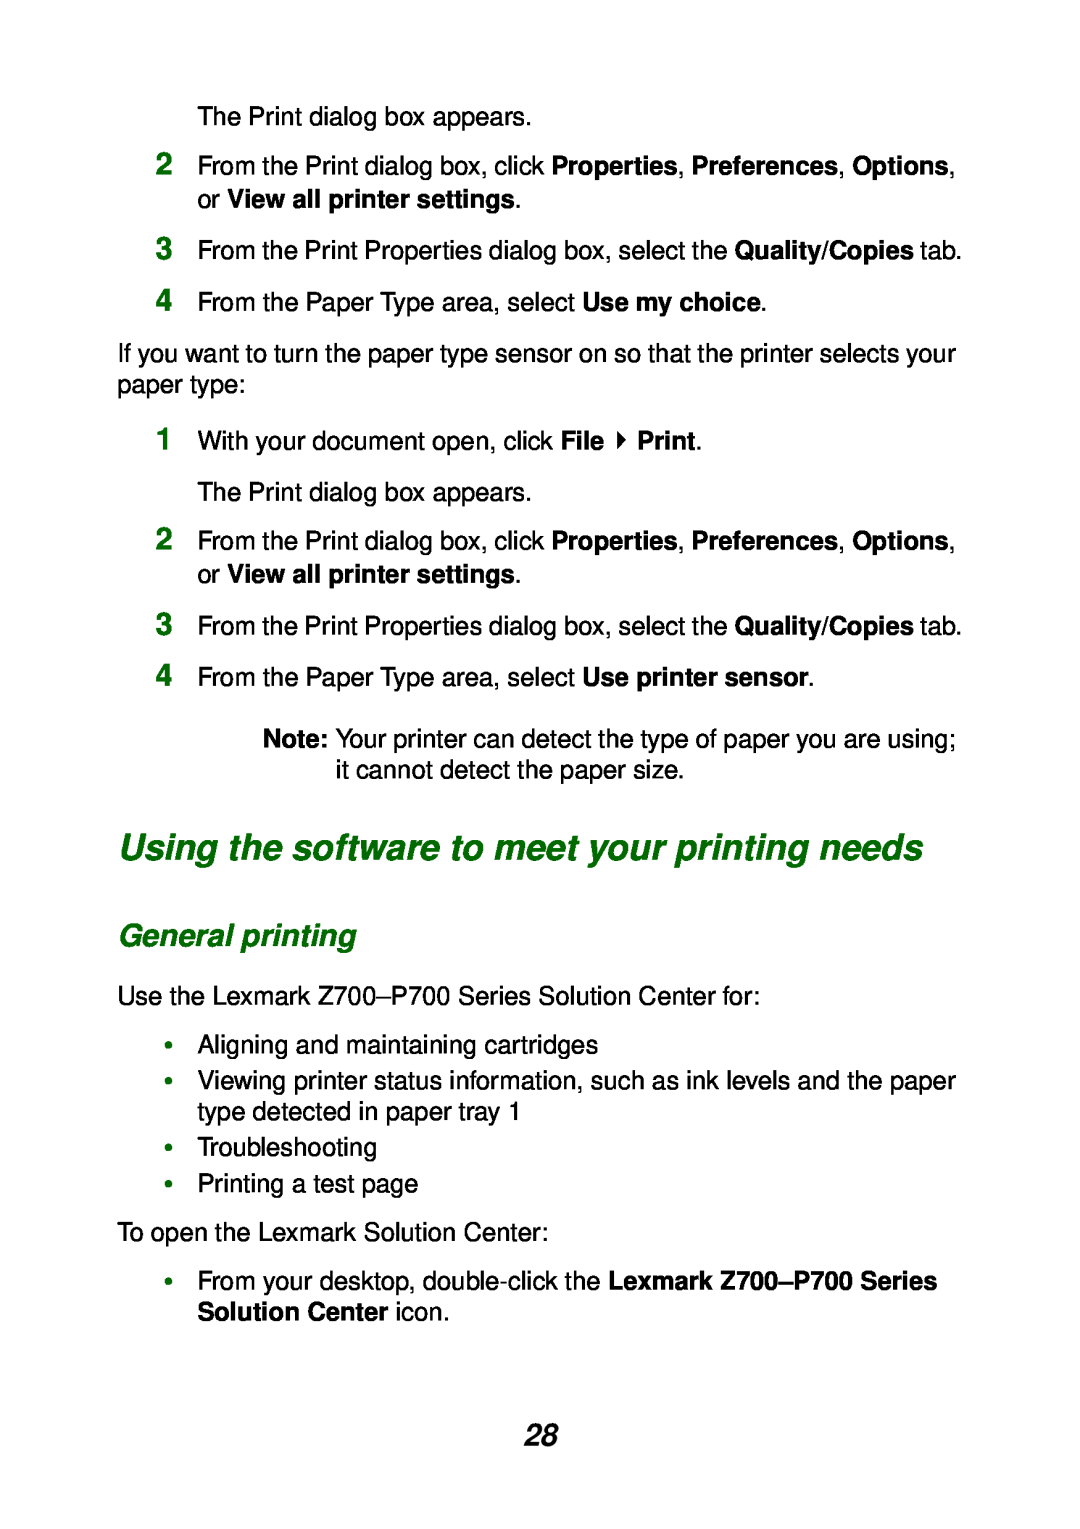 Lexmark P700 manual Using the software to meet your printing needs, General printing 